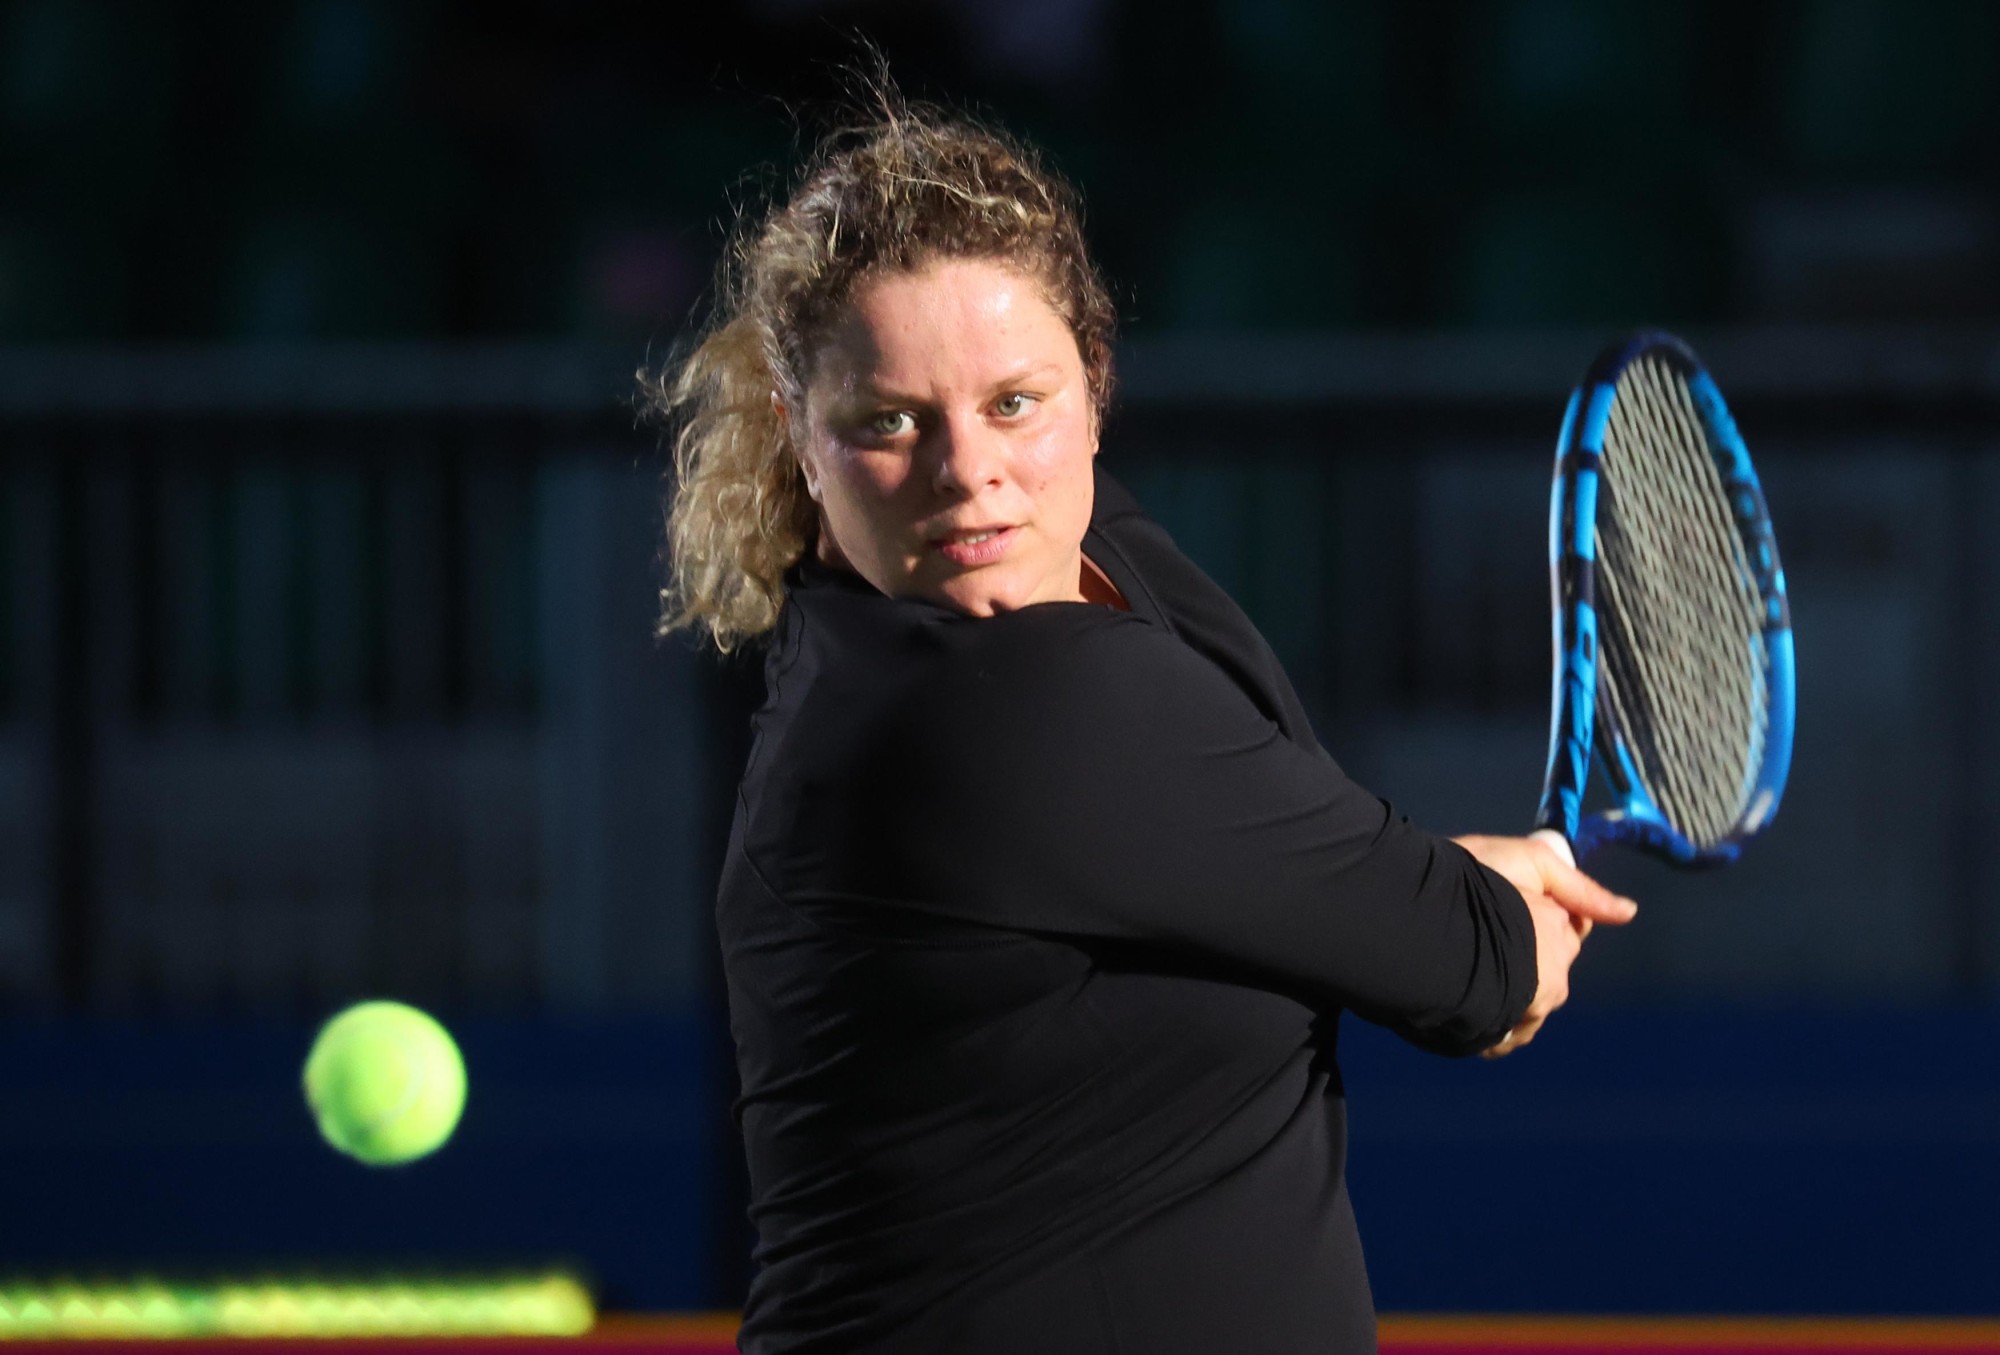 Tennis legend Kim Clijsters in action during the Women’s Singles Exhibition Game against Caroline Wozniacki for Expo 2020 Dubai Tennis Week at the Expo Sports Arena Web Image m52482